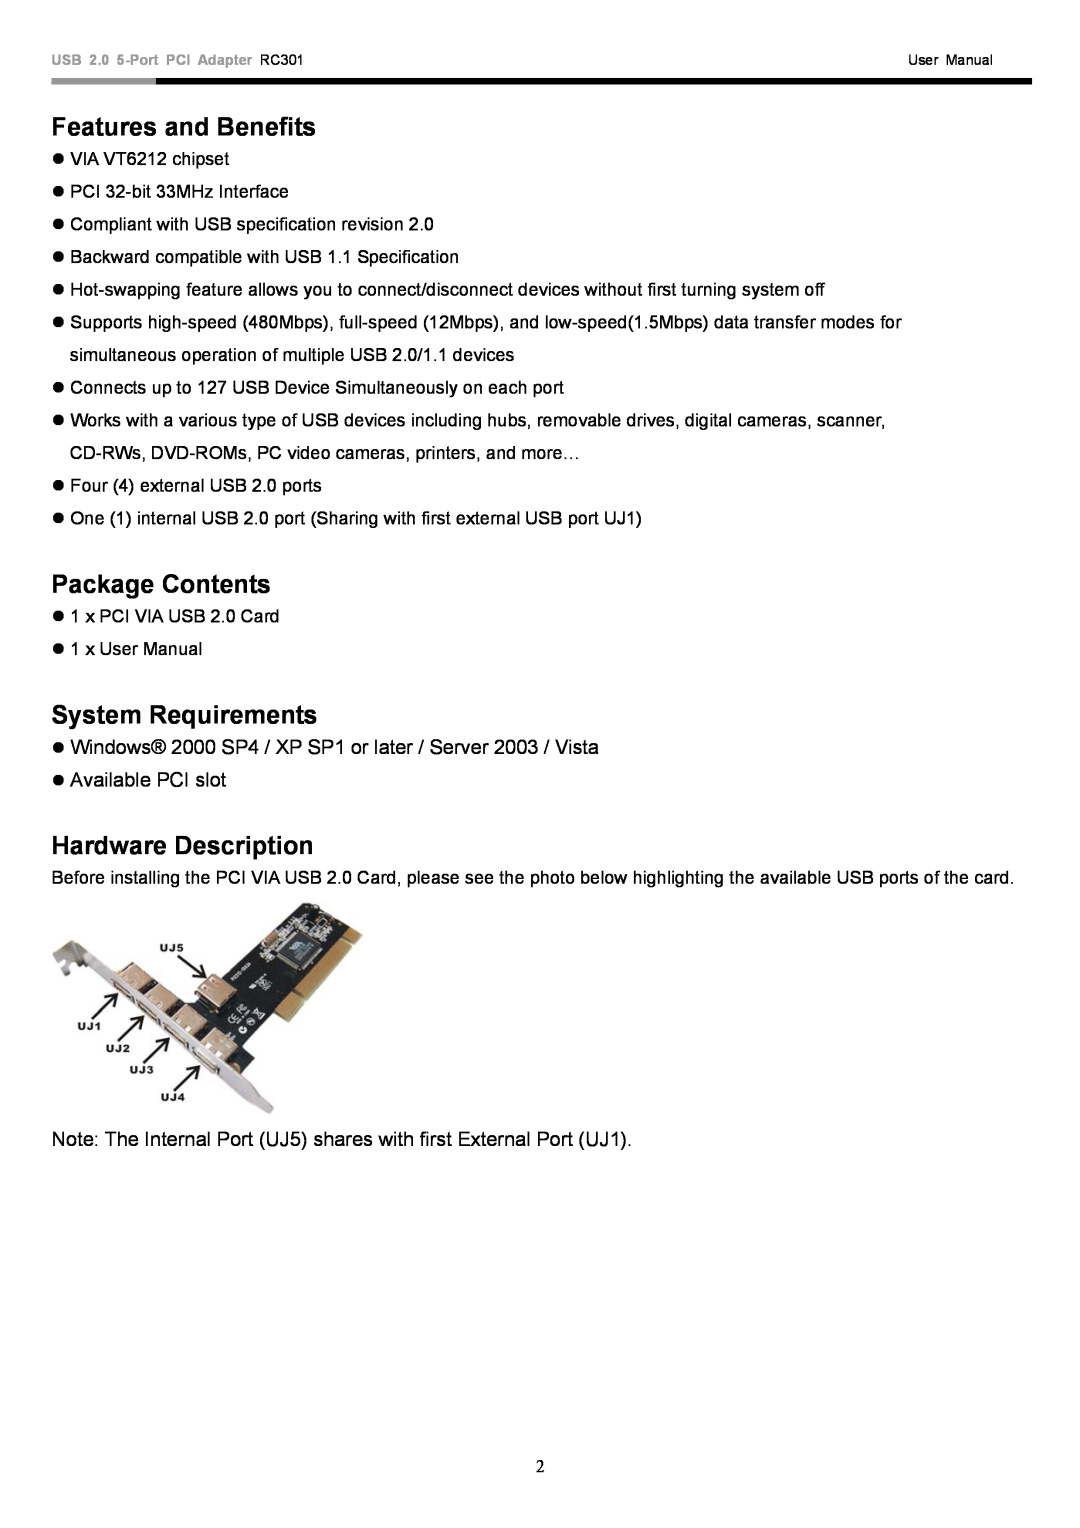 Rosewill RC103 Features and Benefits, Package Contents, System Requirements, Hardware Description, z Available PCI slot 